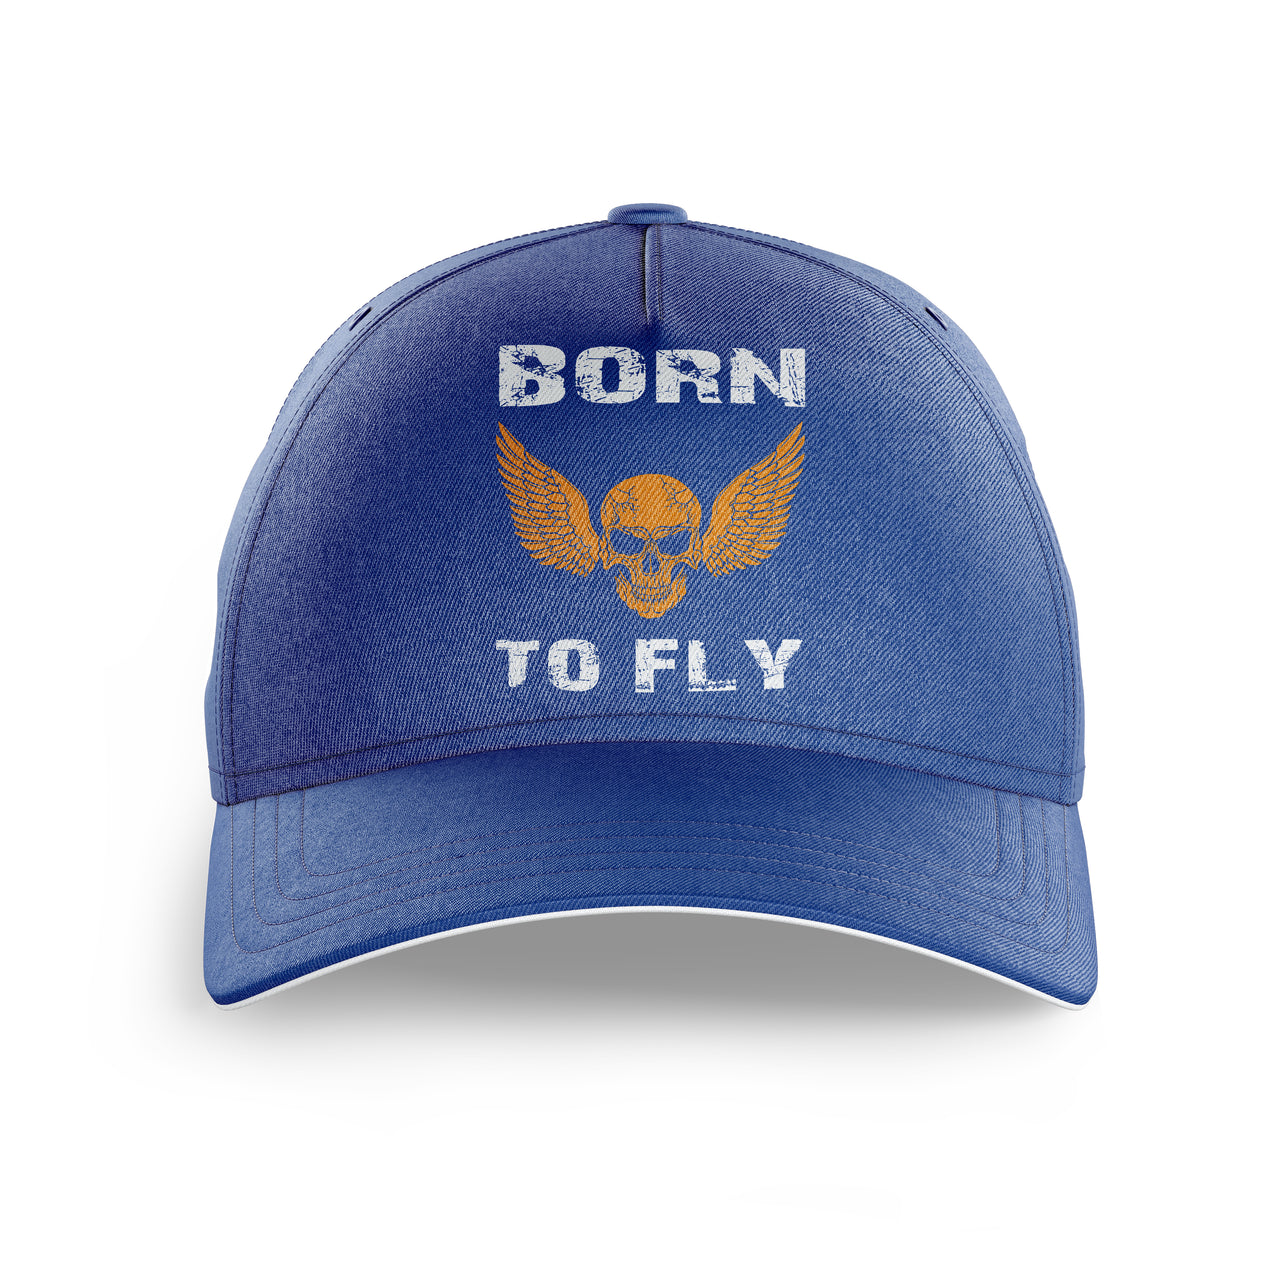 Born To Fly SKELETON Printed Hats